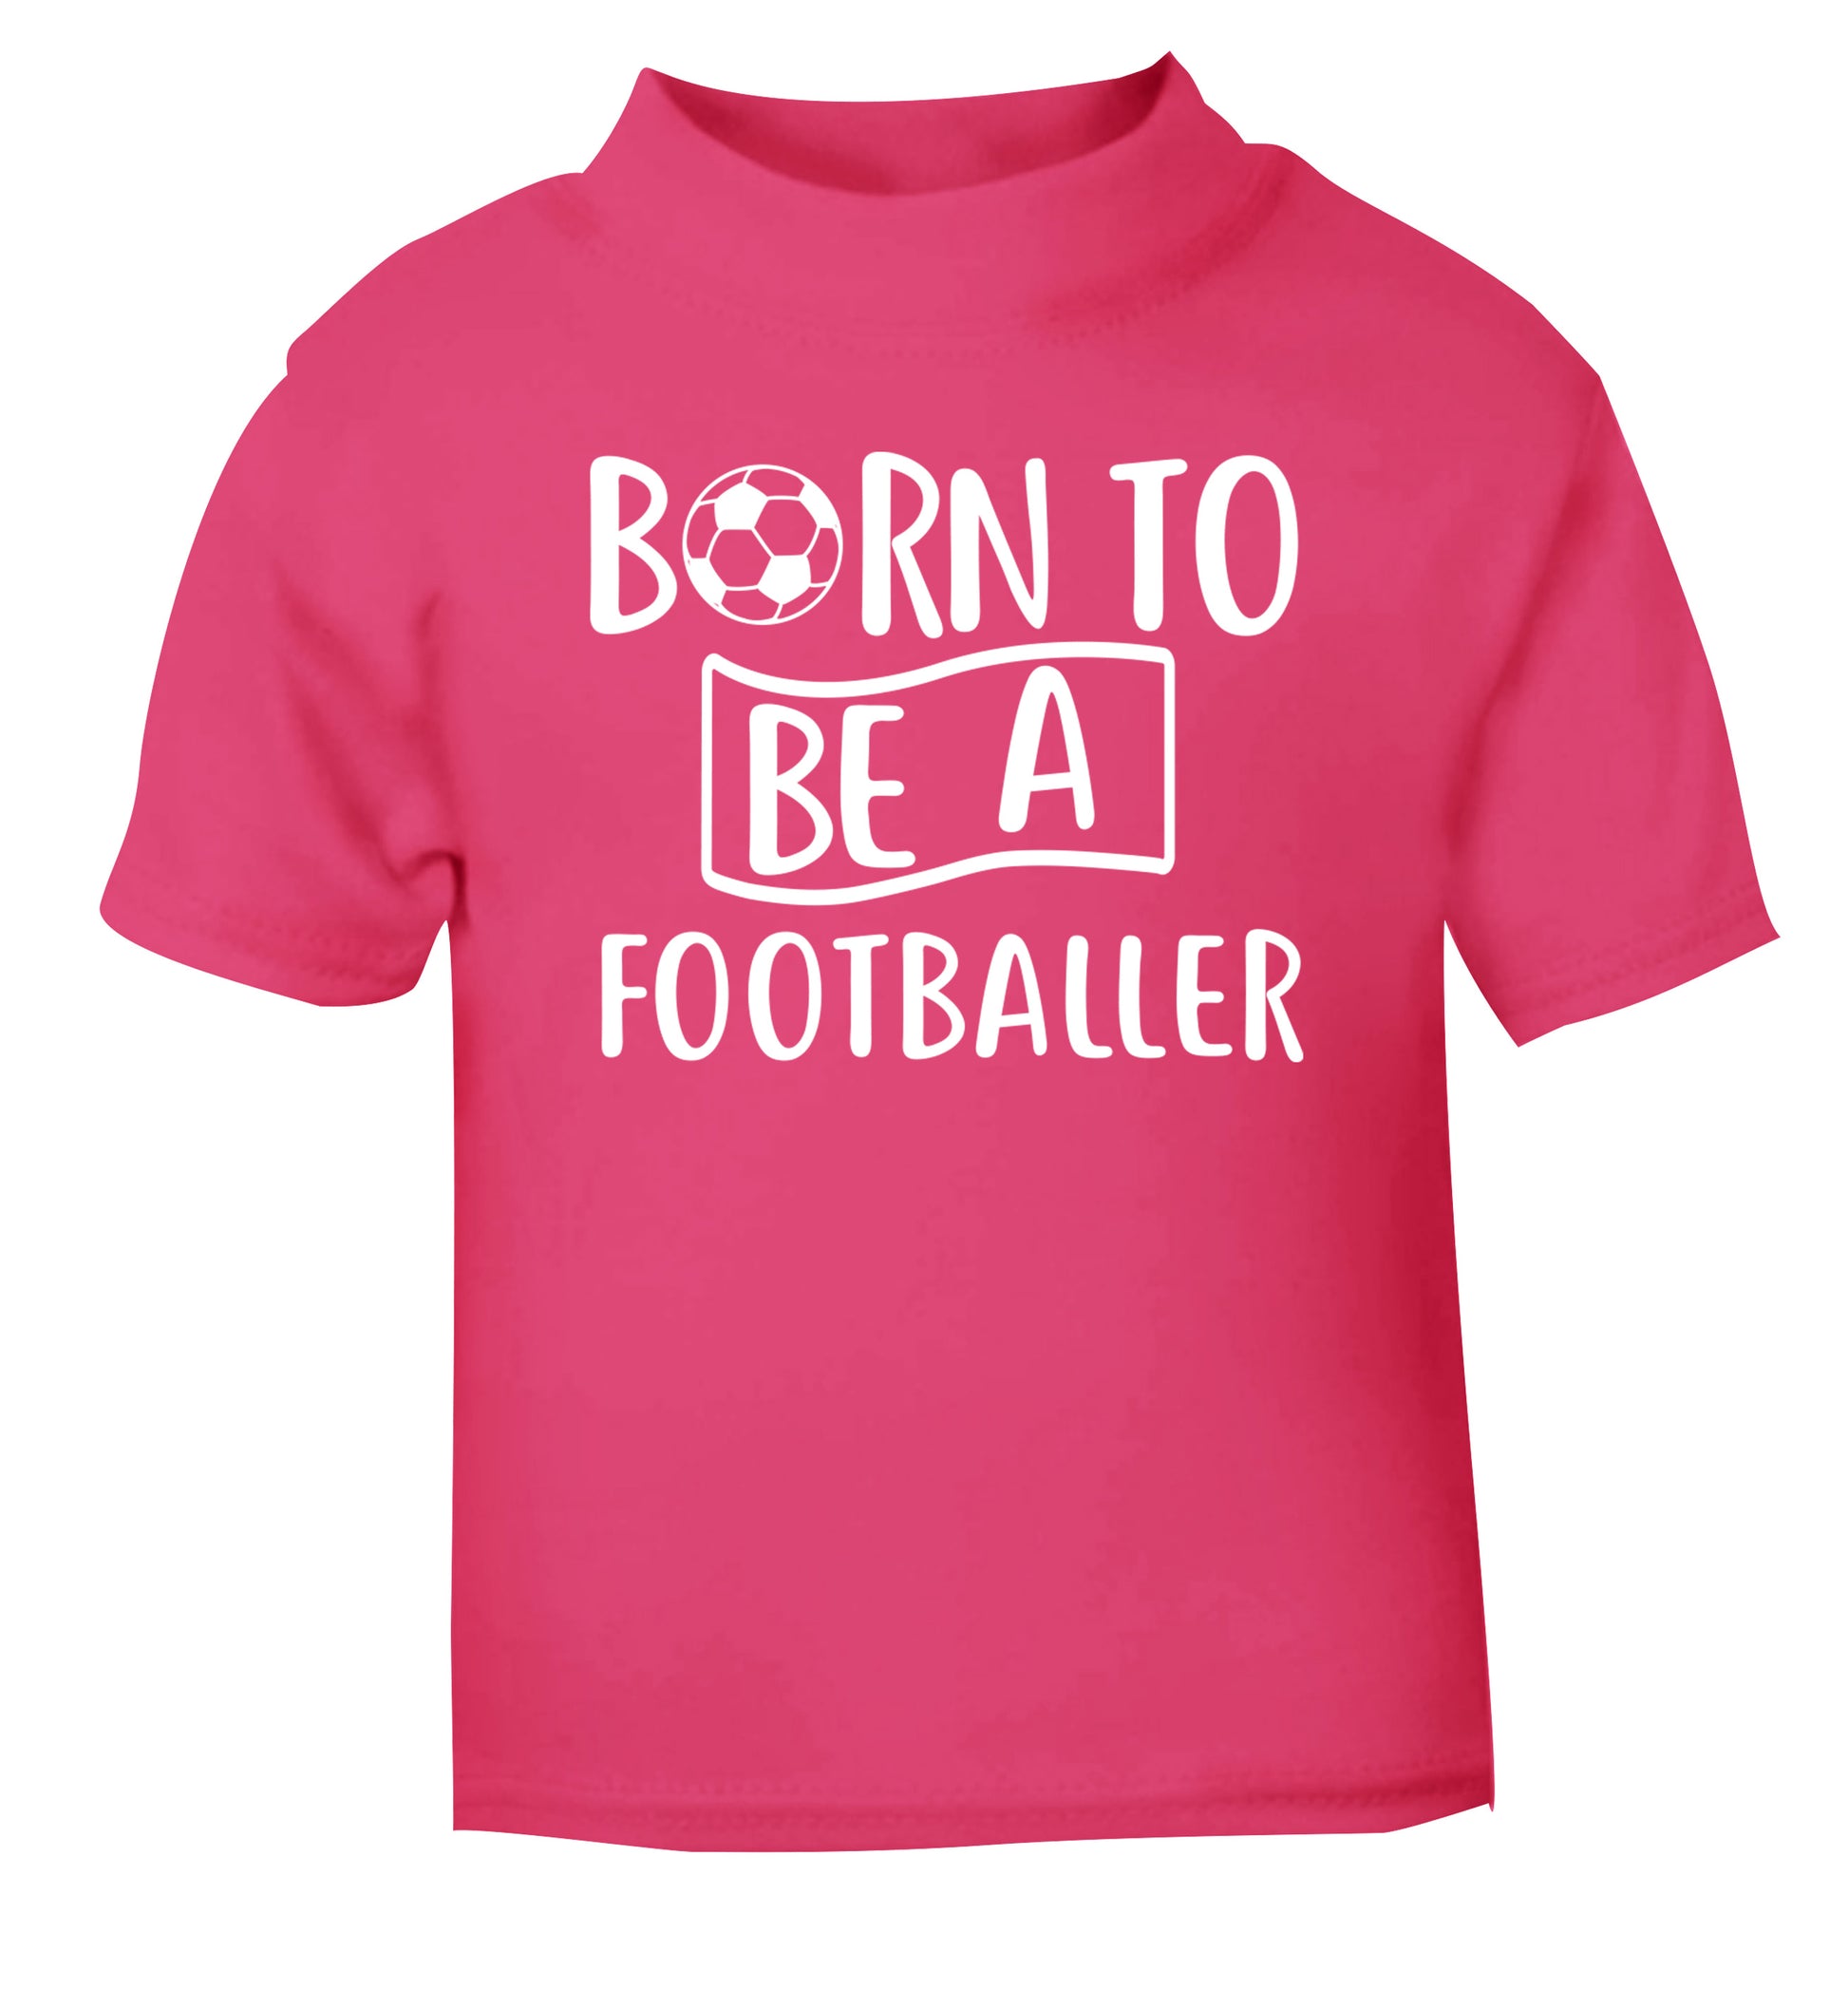 Born to be a footballer pink Baby Toddler Tshirt 2 Years